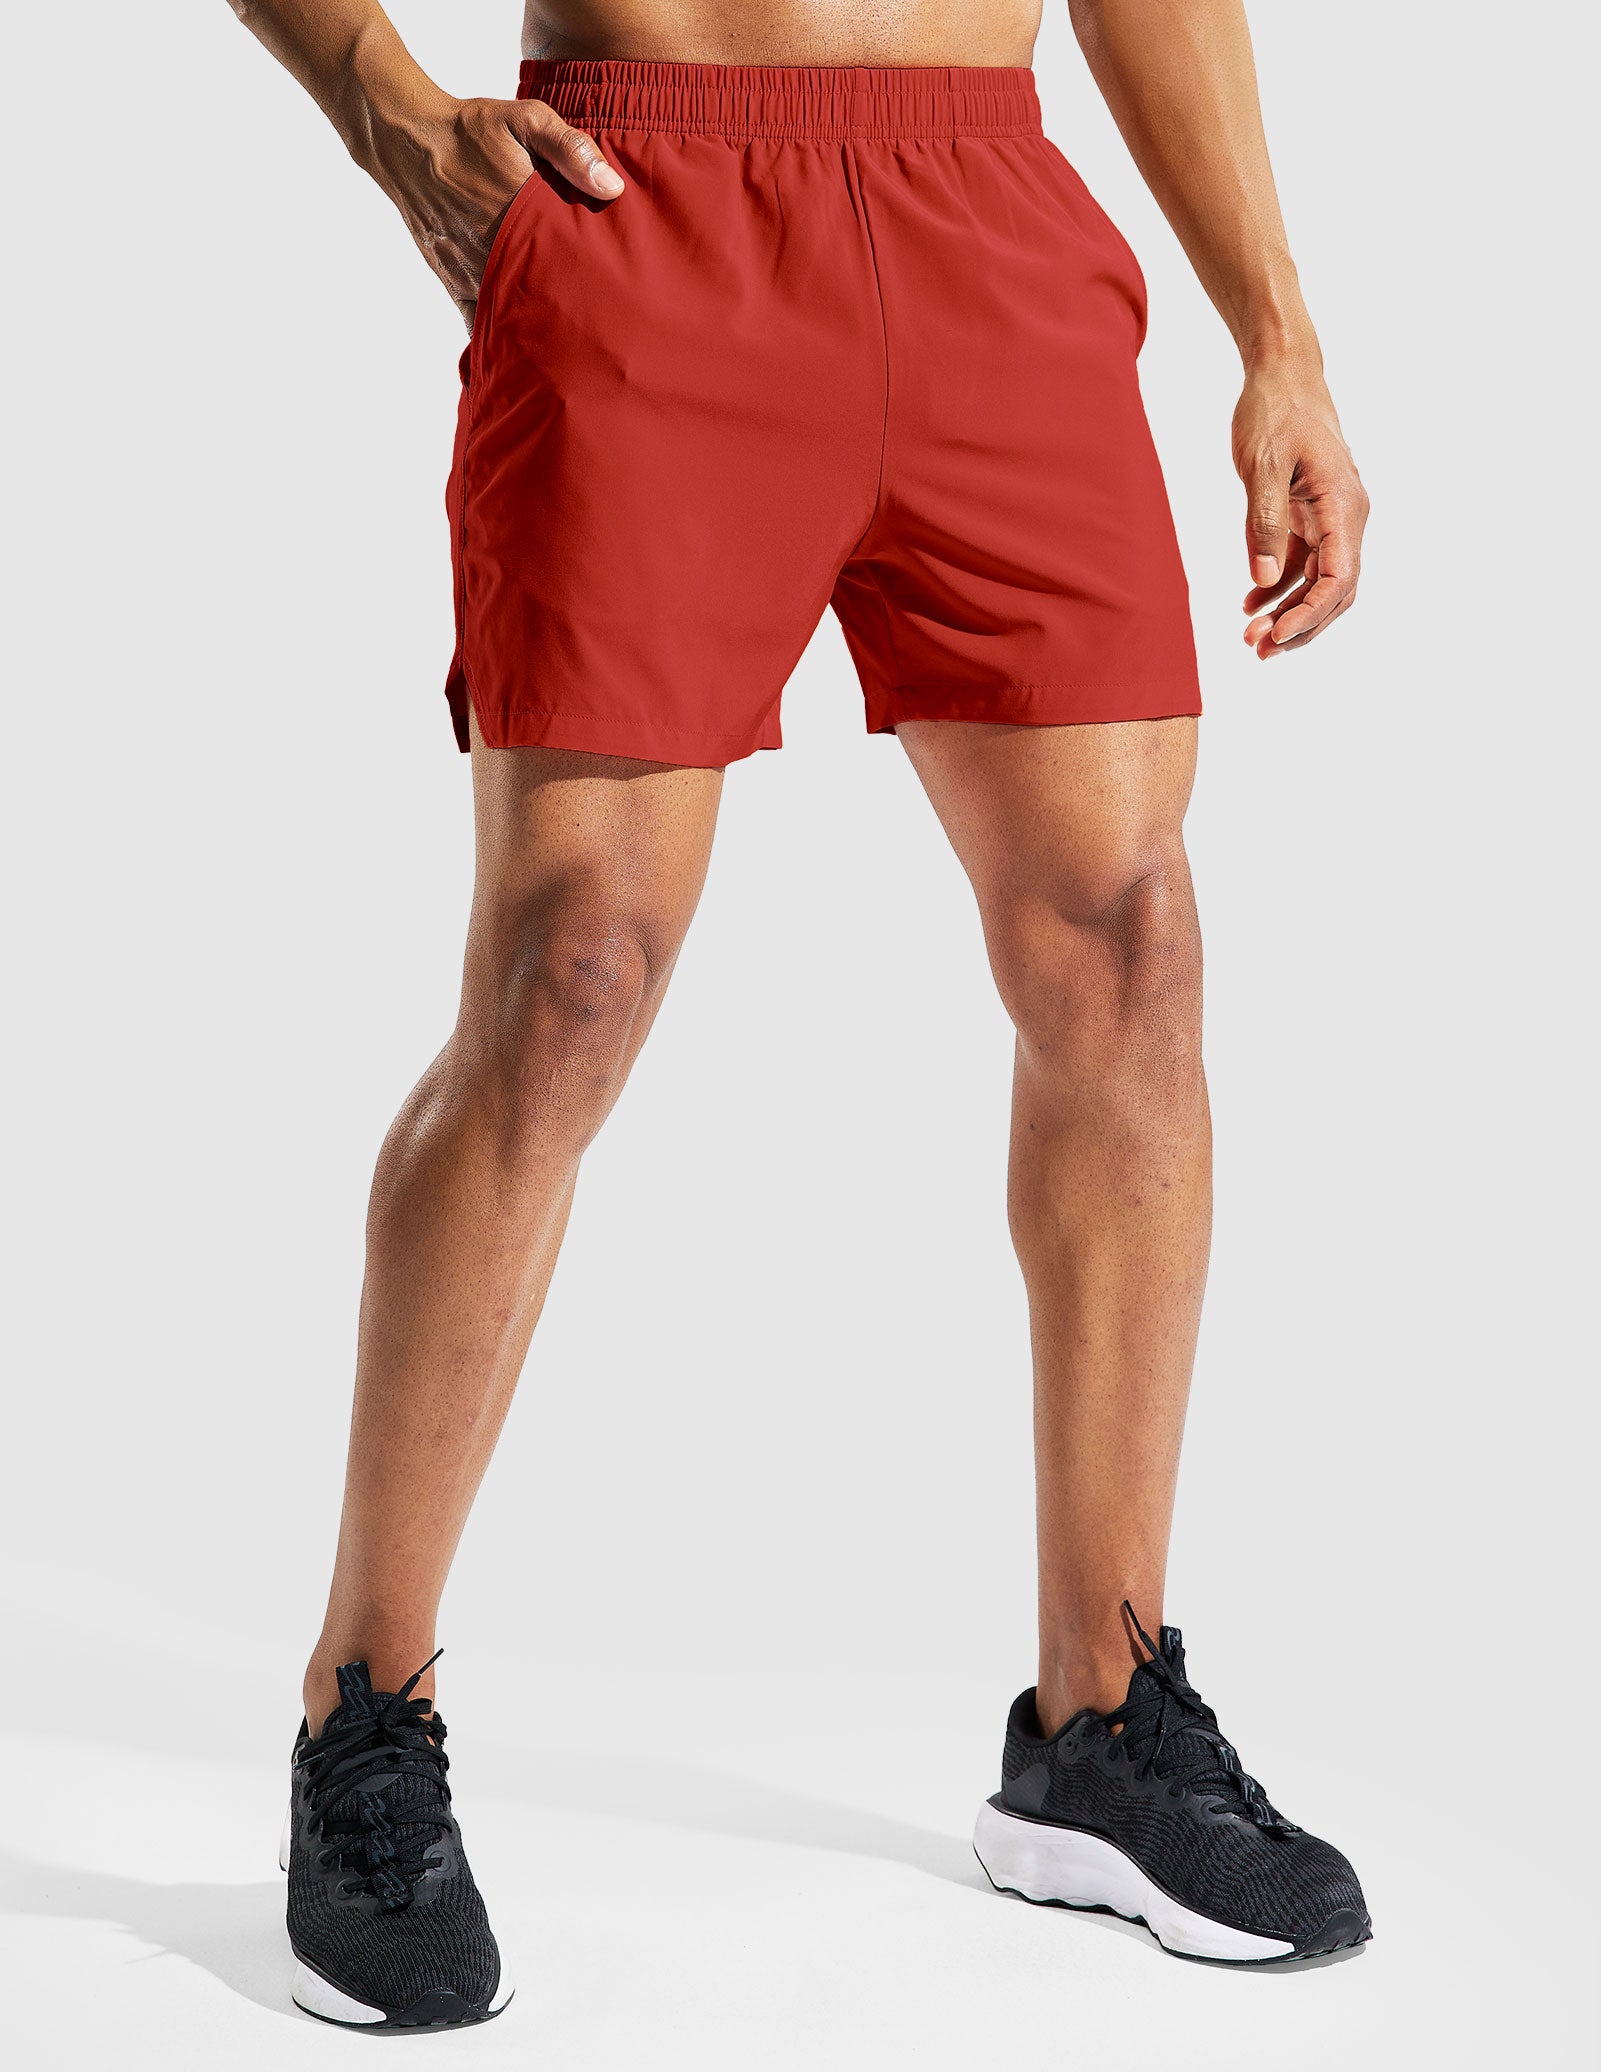 Men's Quick Dry Running Athletic Shorts with Pockets 5 Inch